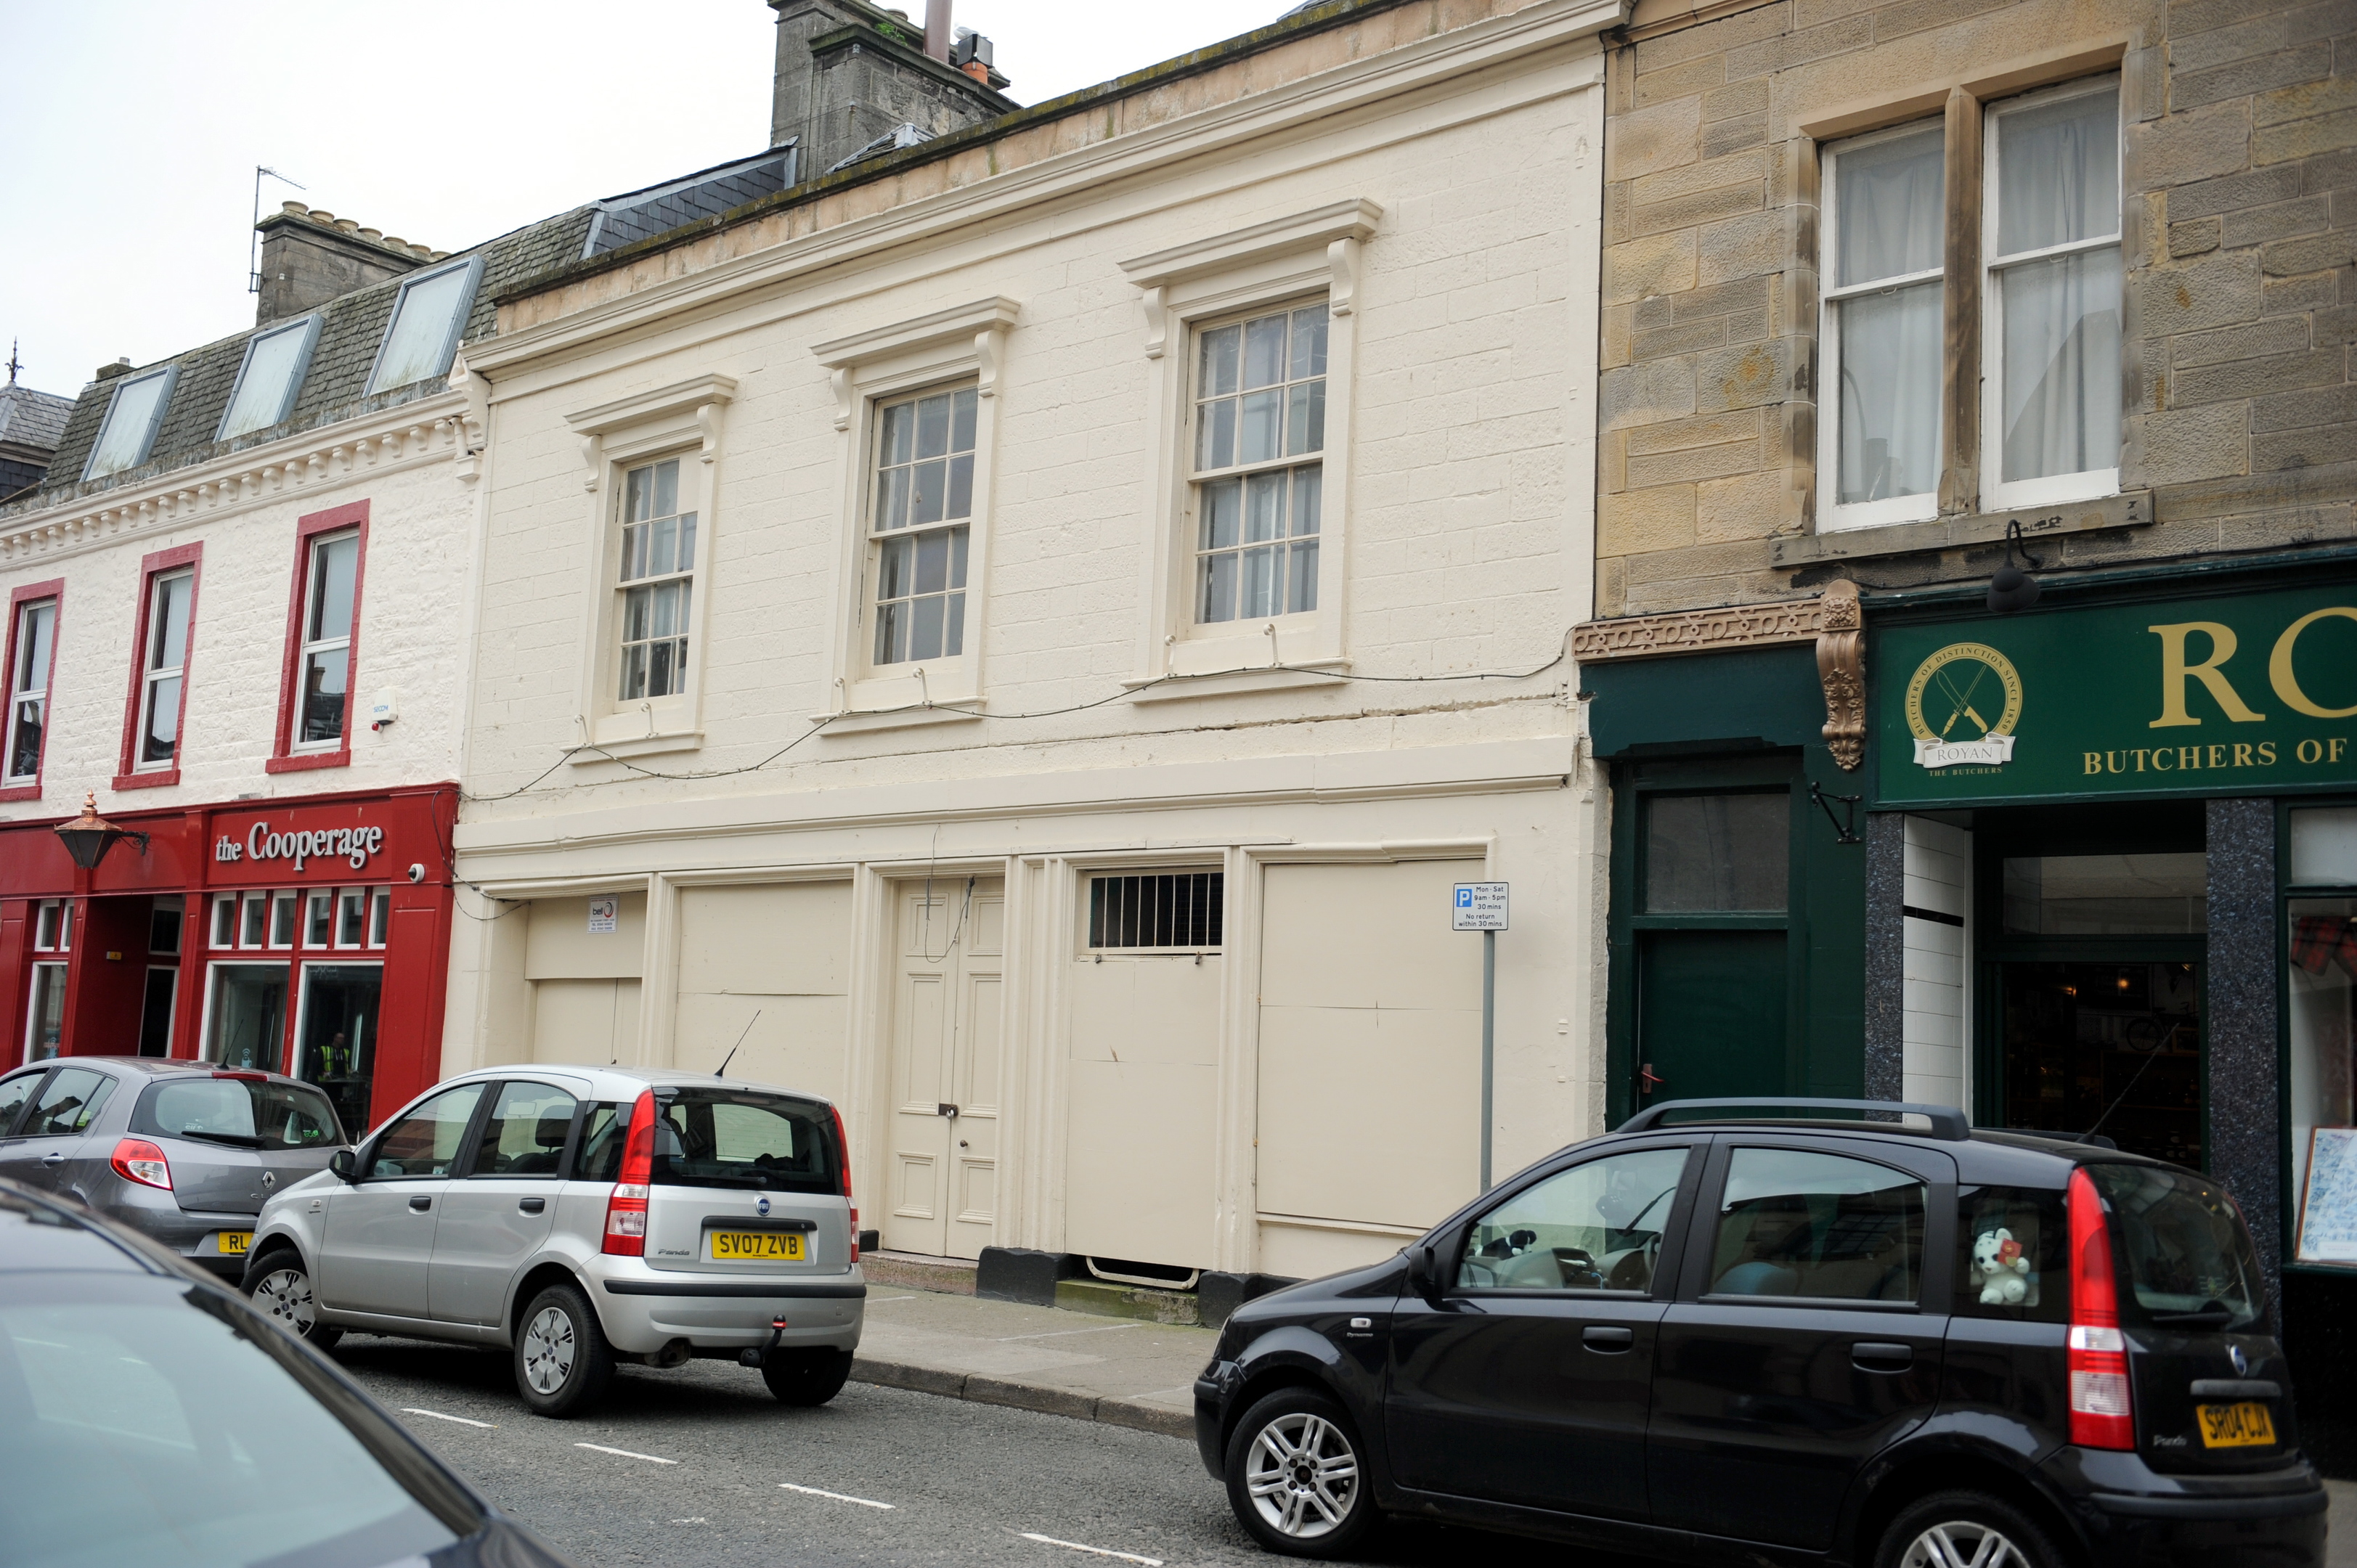 Historic Environment Scotland previously objected to the buildings at 184-188 High Street in Elgin being demolished.